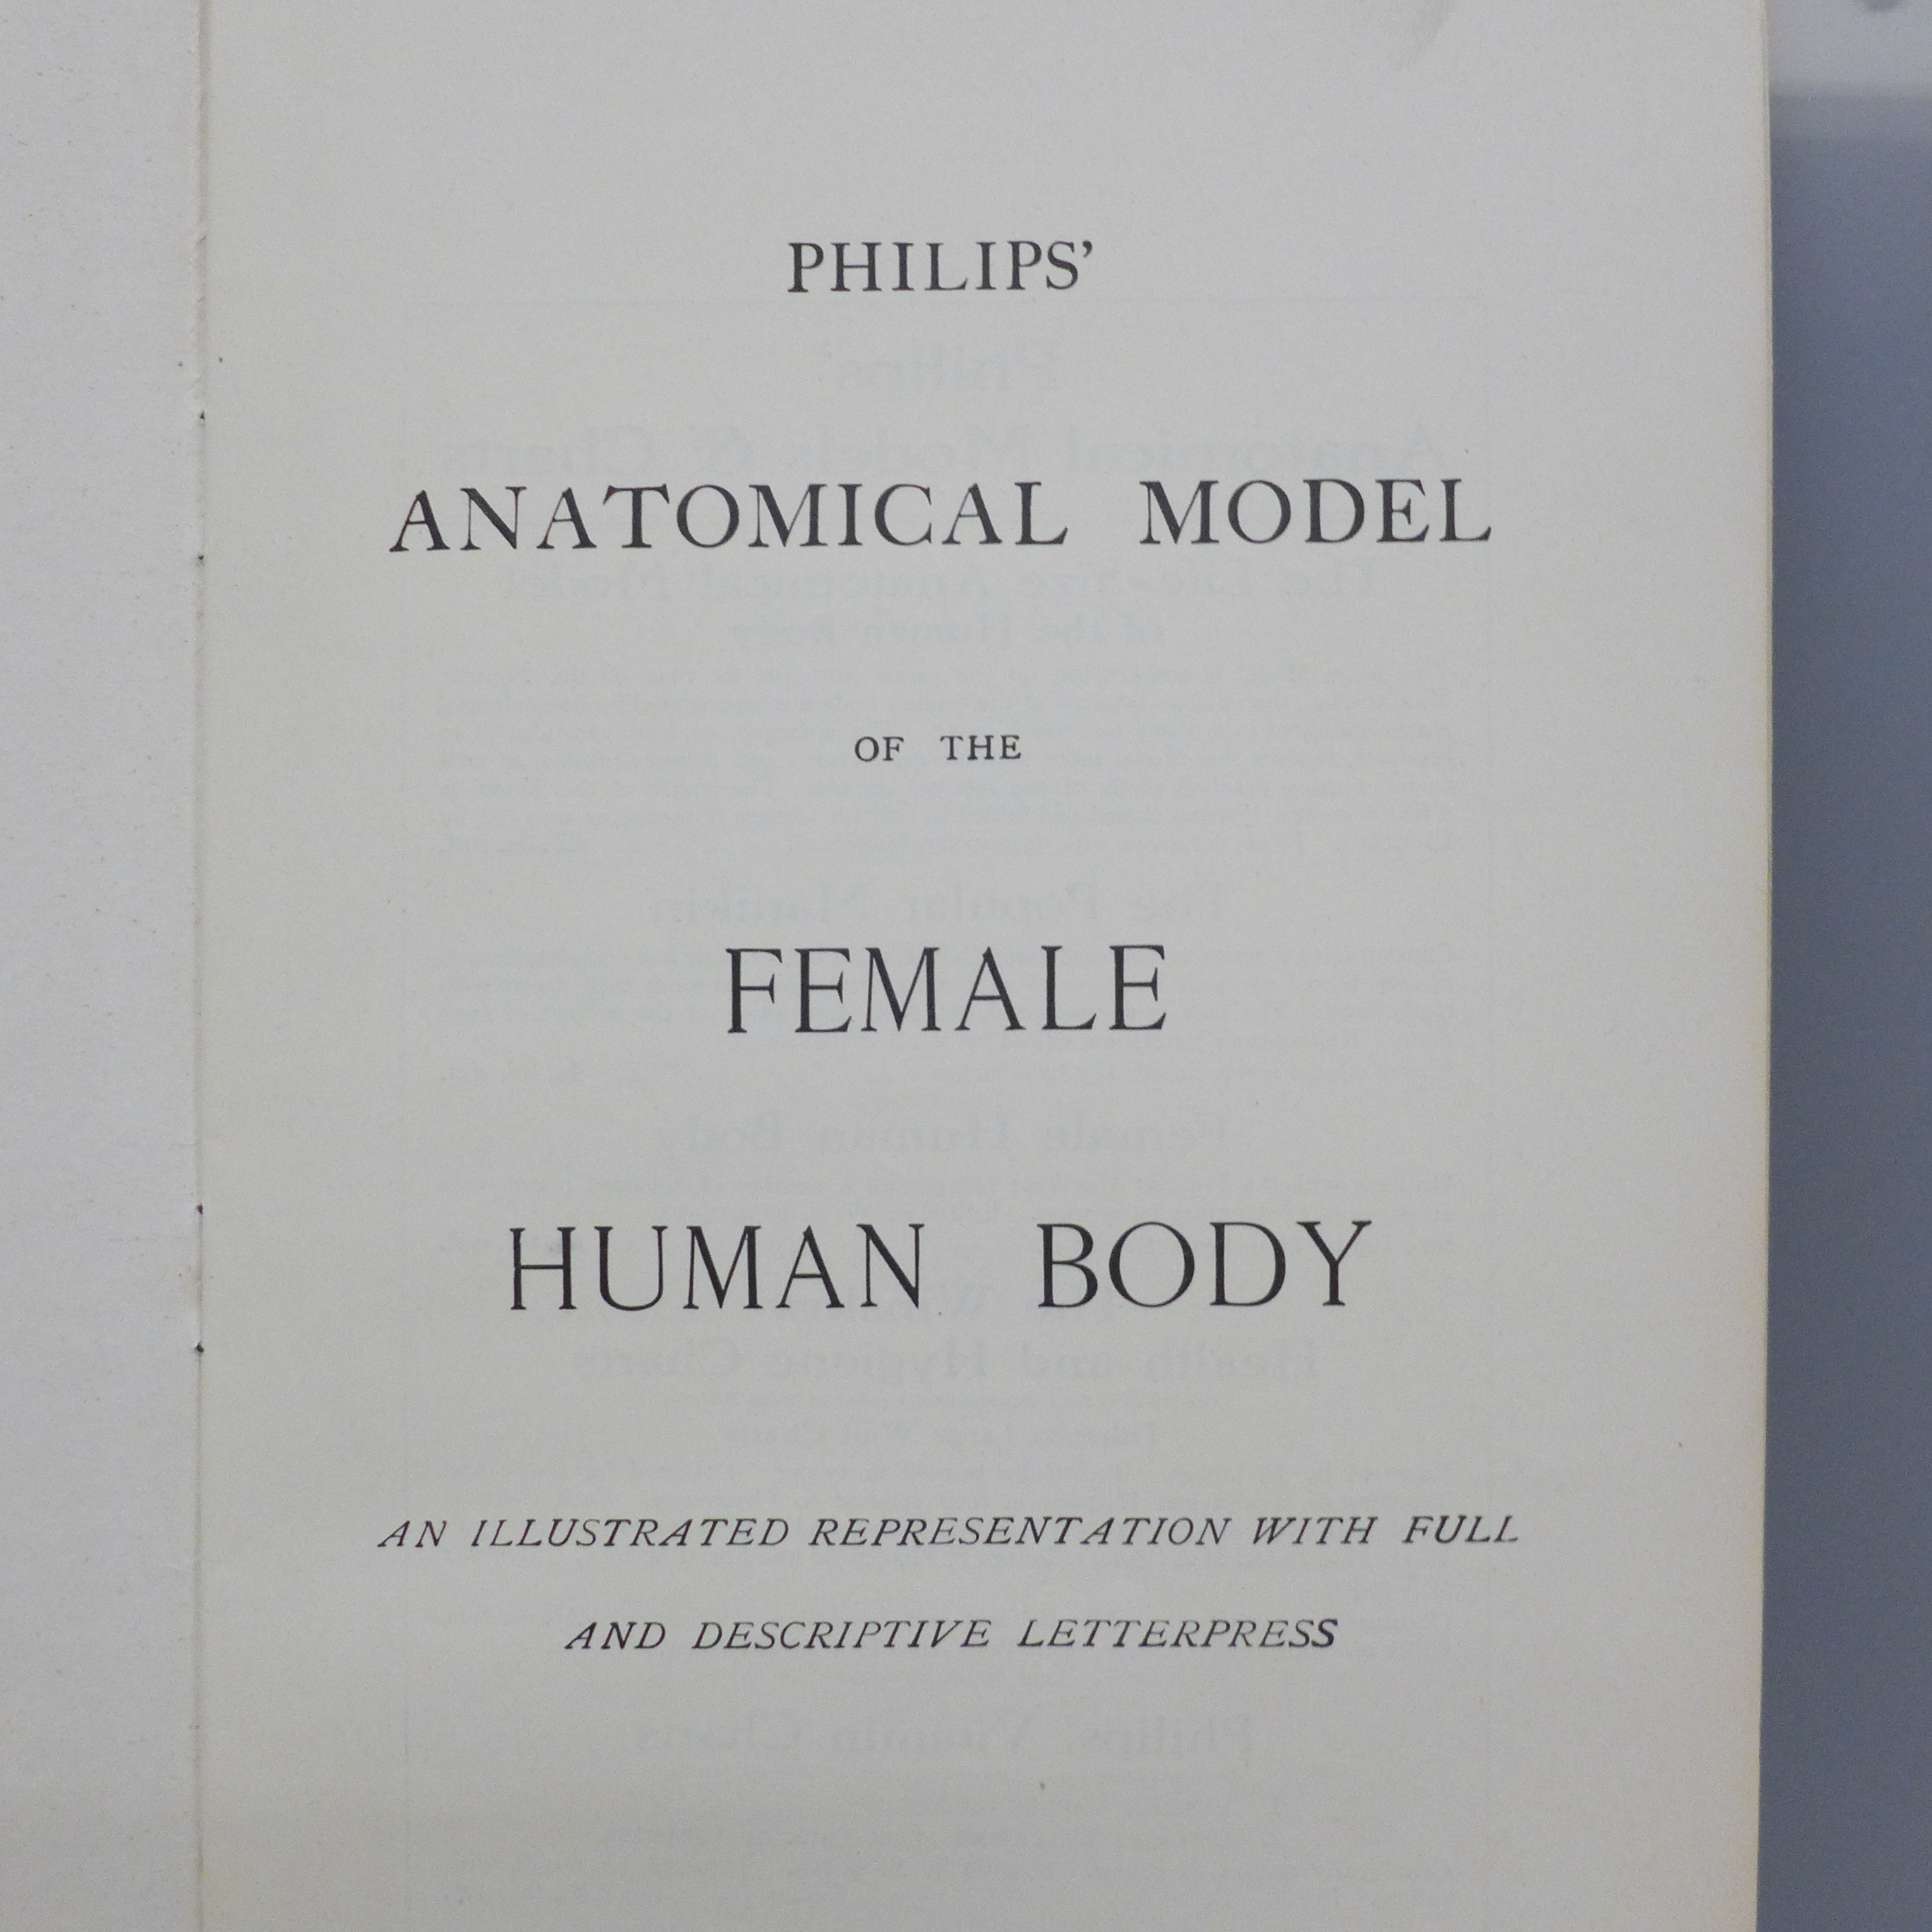 A Philips' Model of the Human Body (female) illustrated and edited by W.S. Furneaux - Image 2 of 8